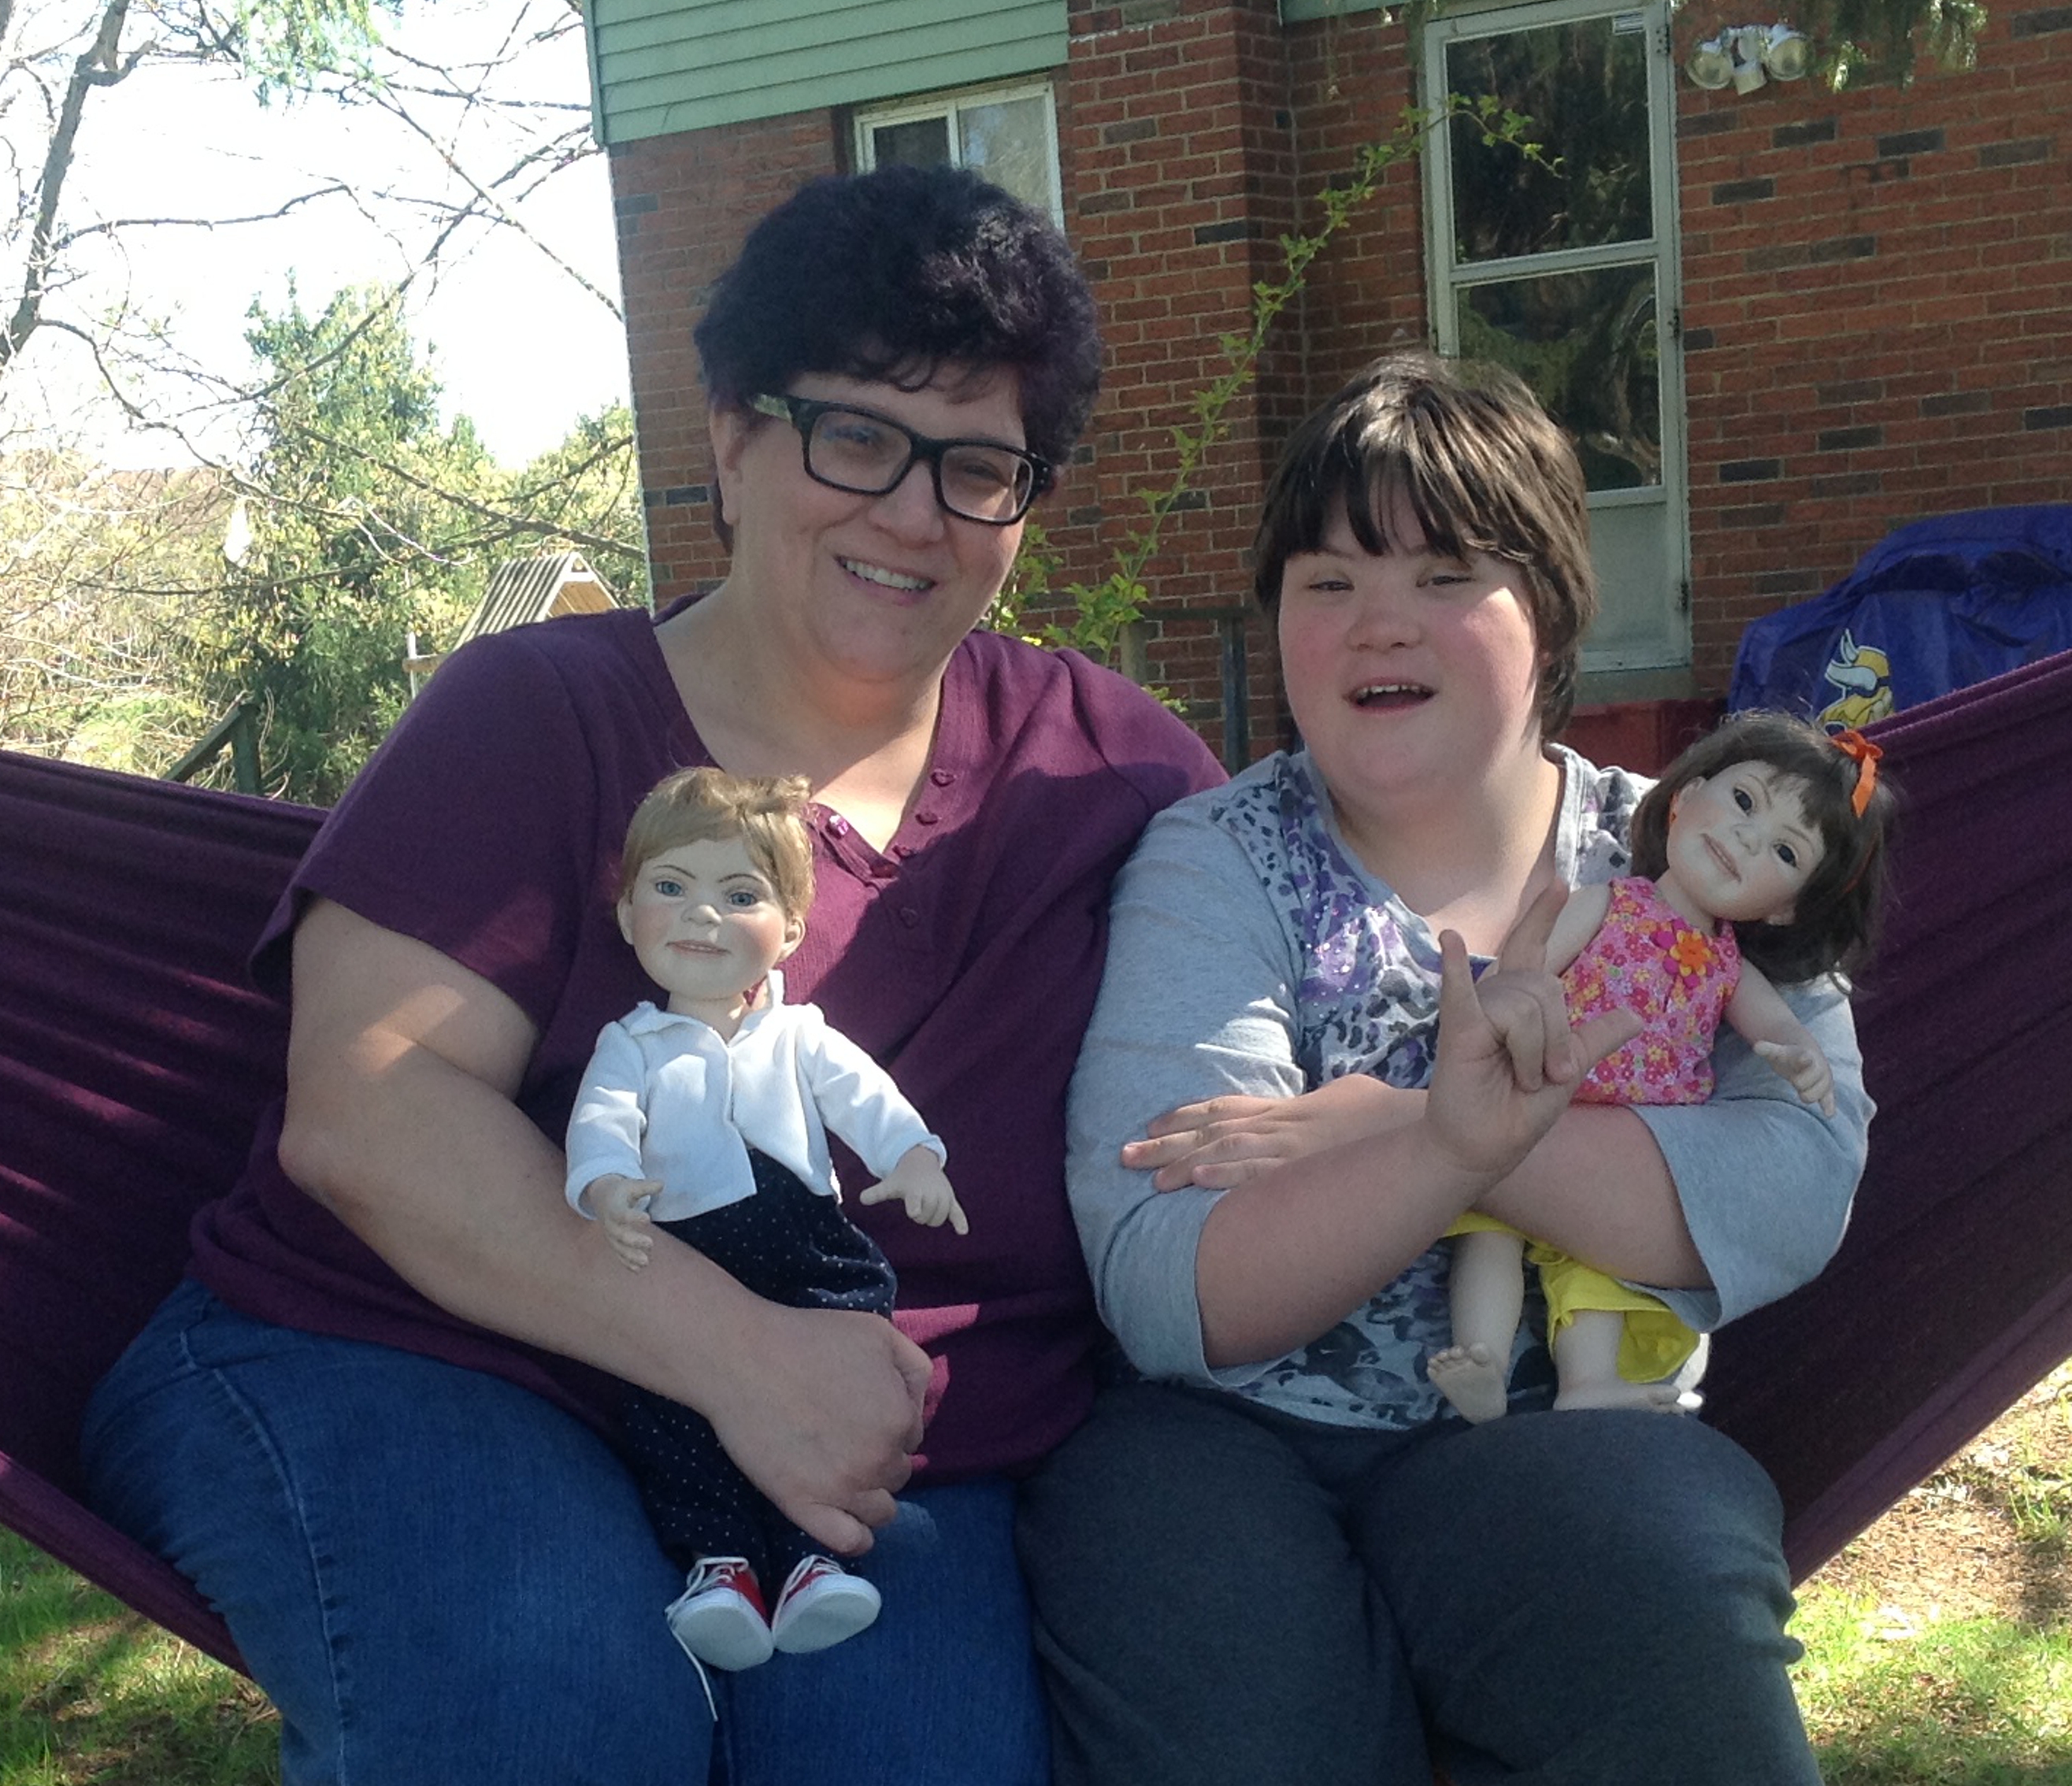 Inspired by daughter, mom creates dolls for kids with Down syndrome